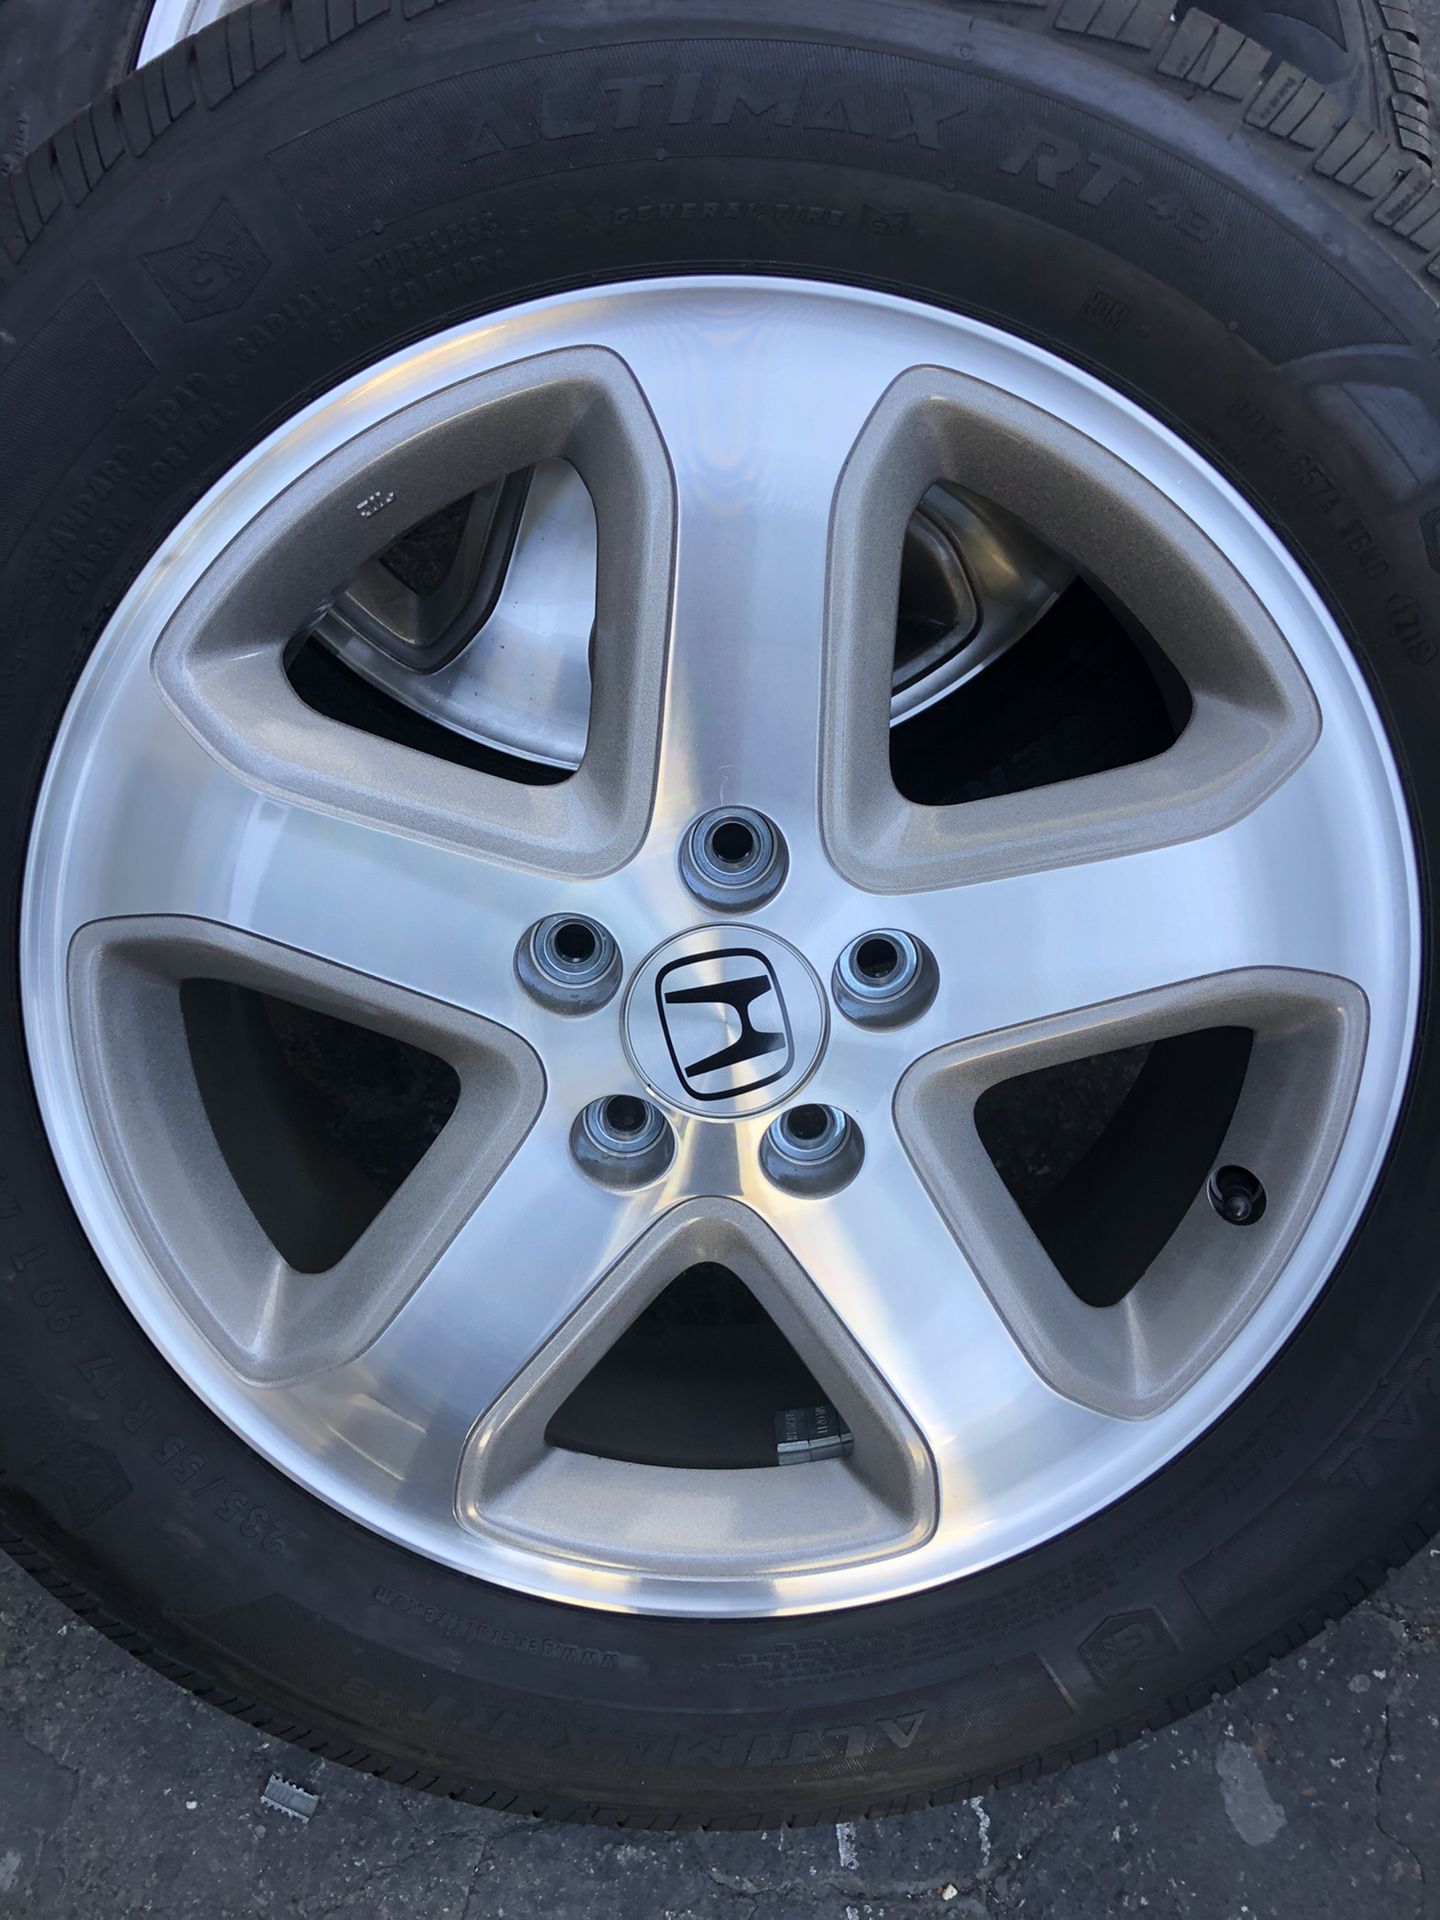 2006-2007 Honda Accord Factory Crosstour new wheels 17” with new tires with less than 50 miles